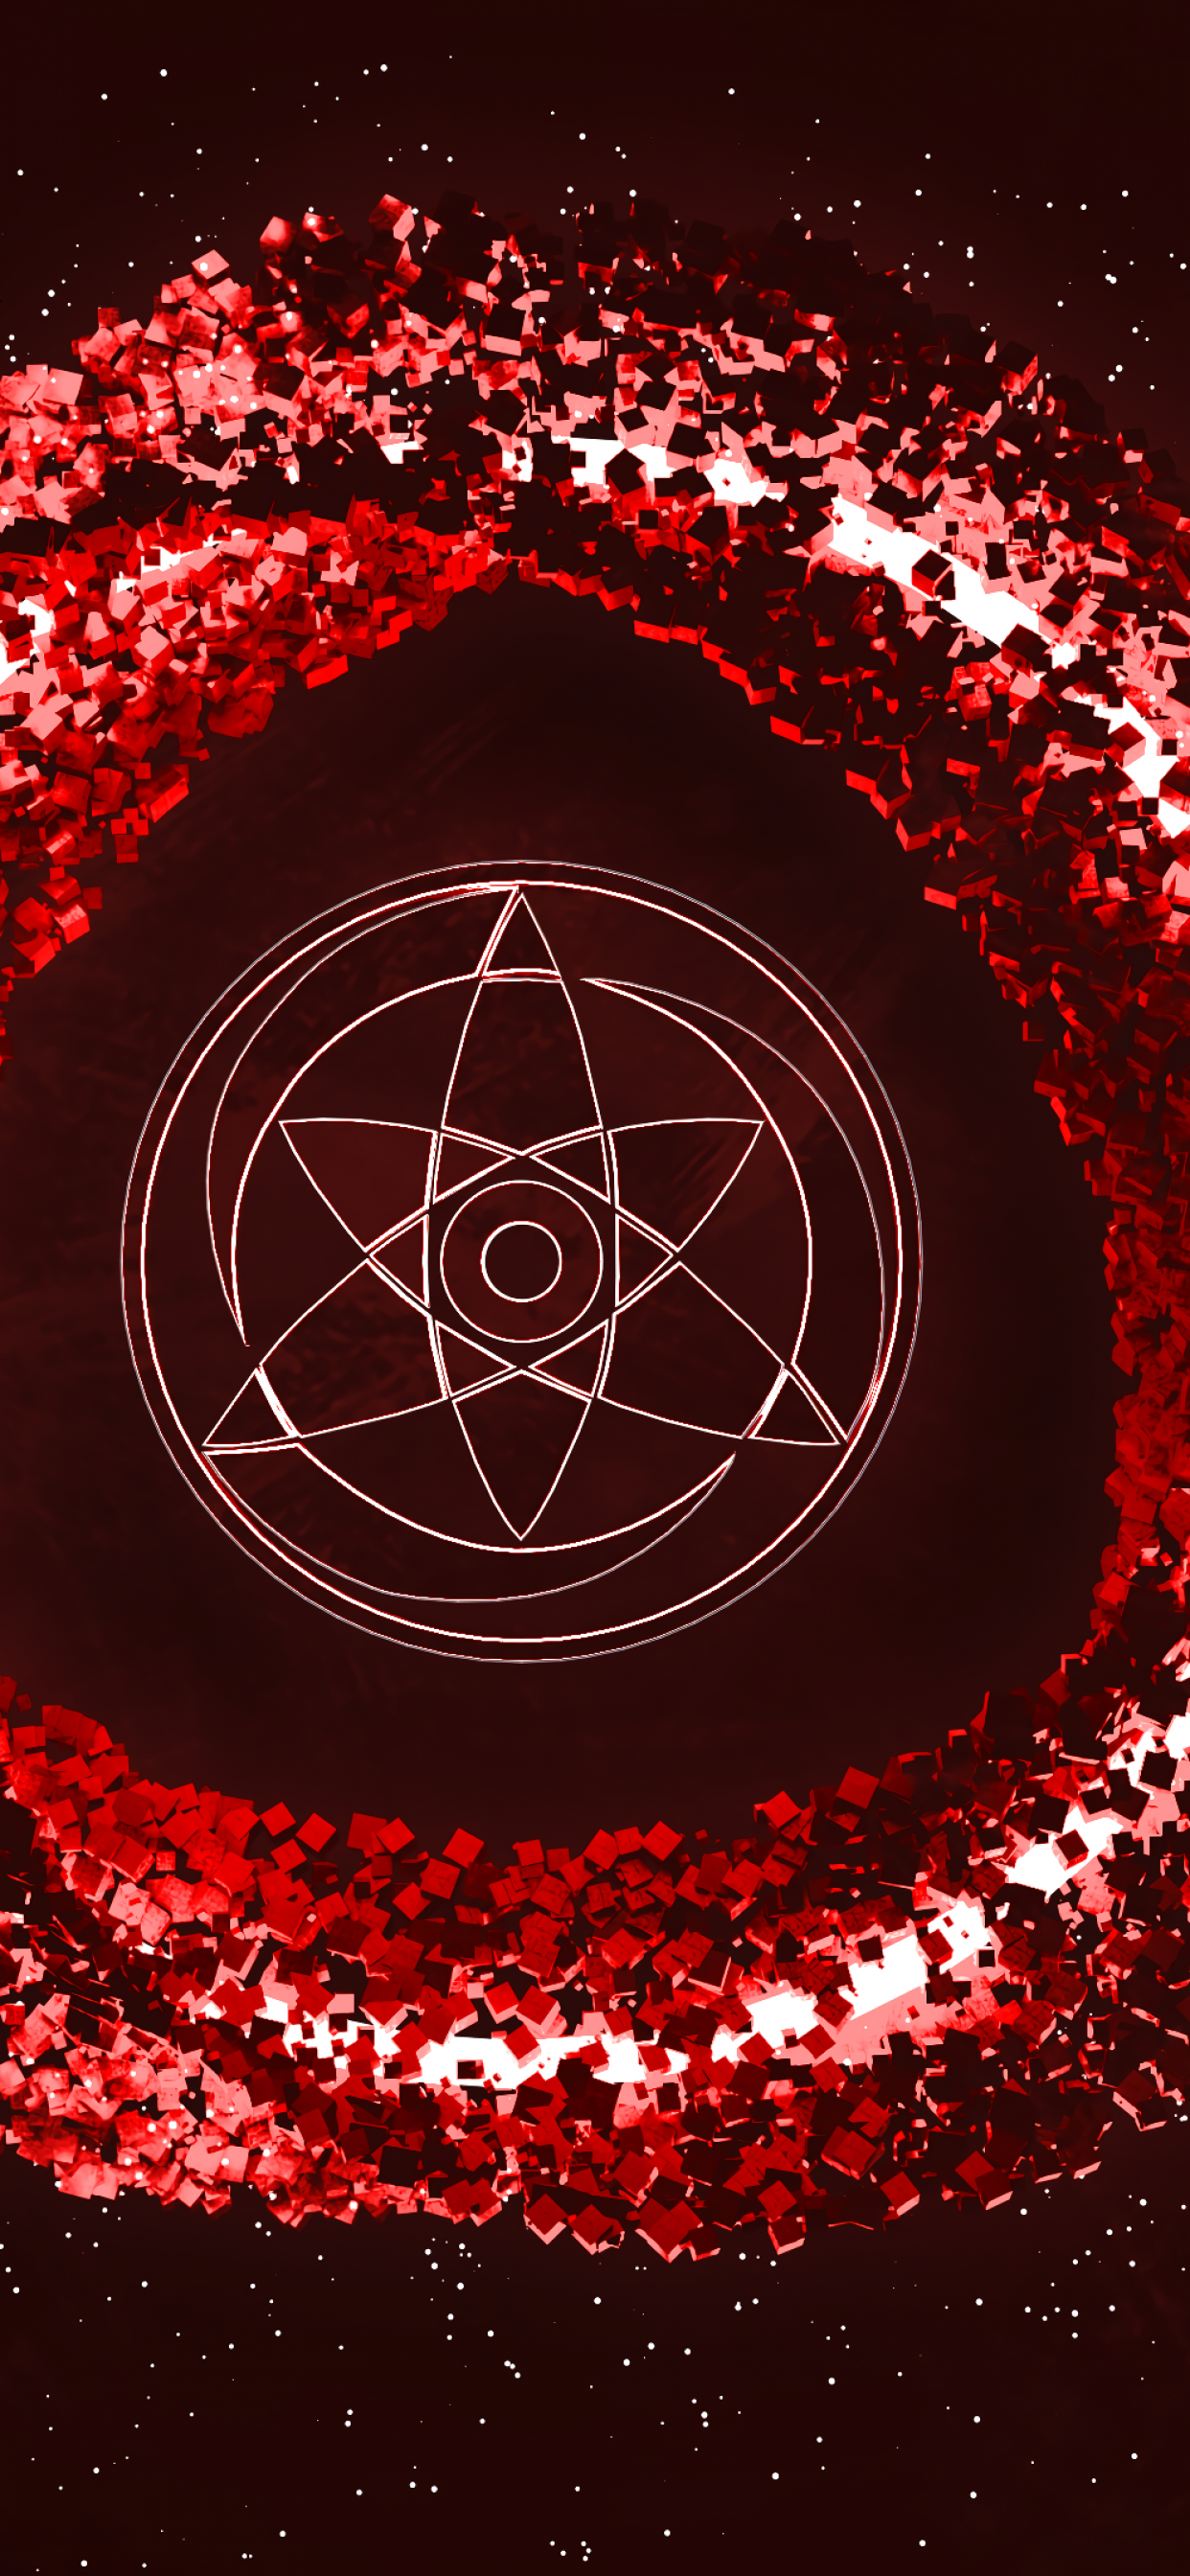 Sharingan Live Wallpaper for PC Windows or MAC for Free